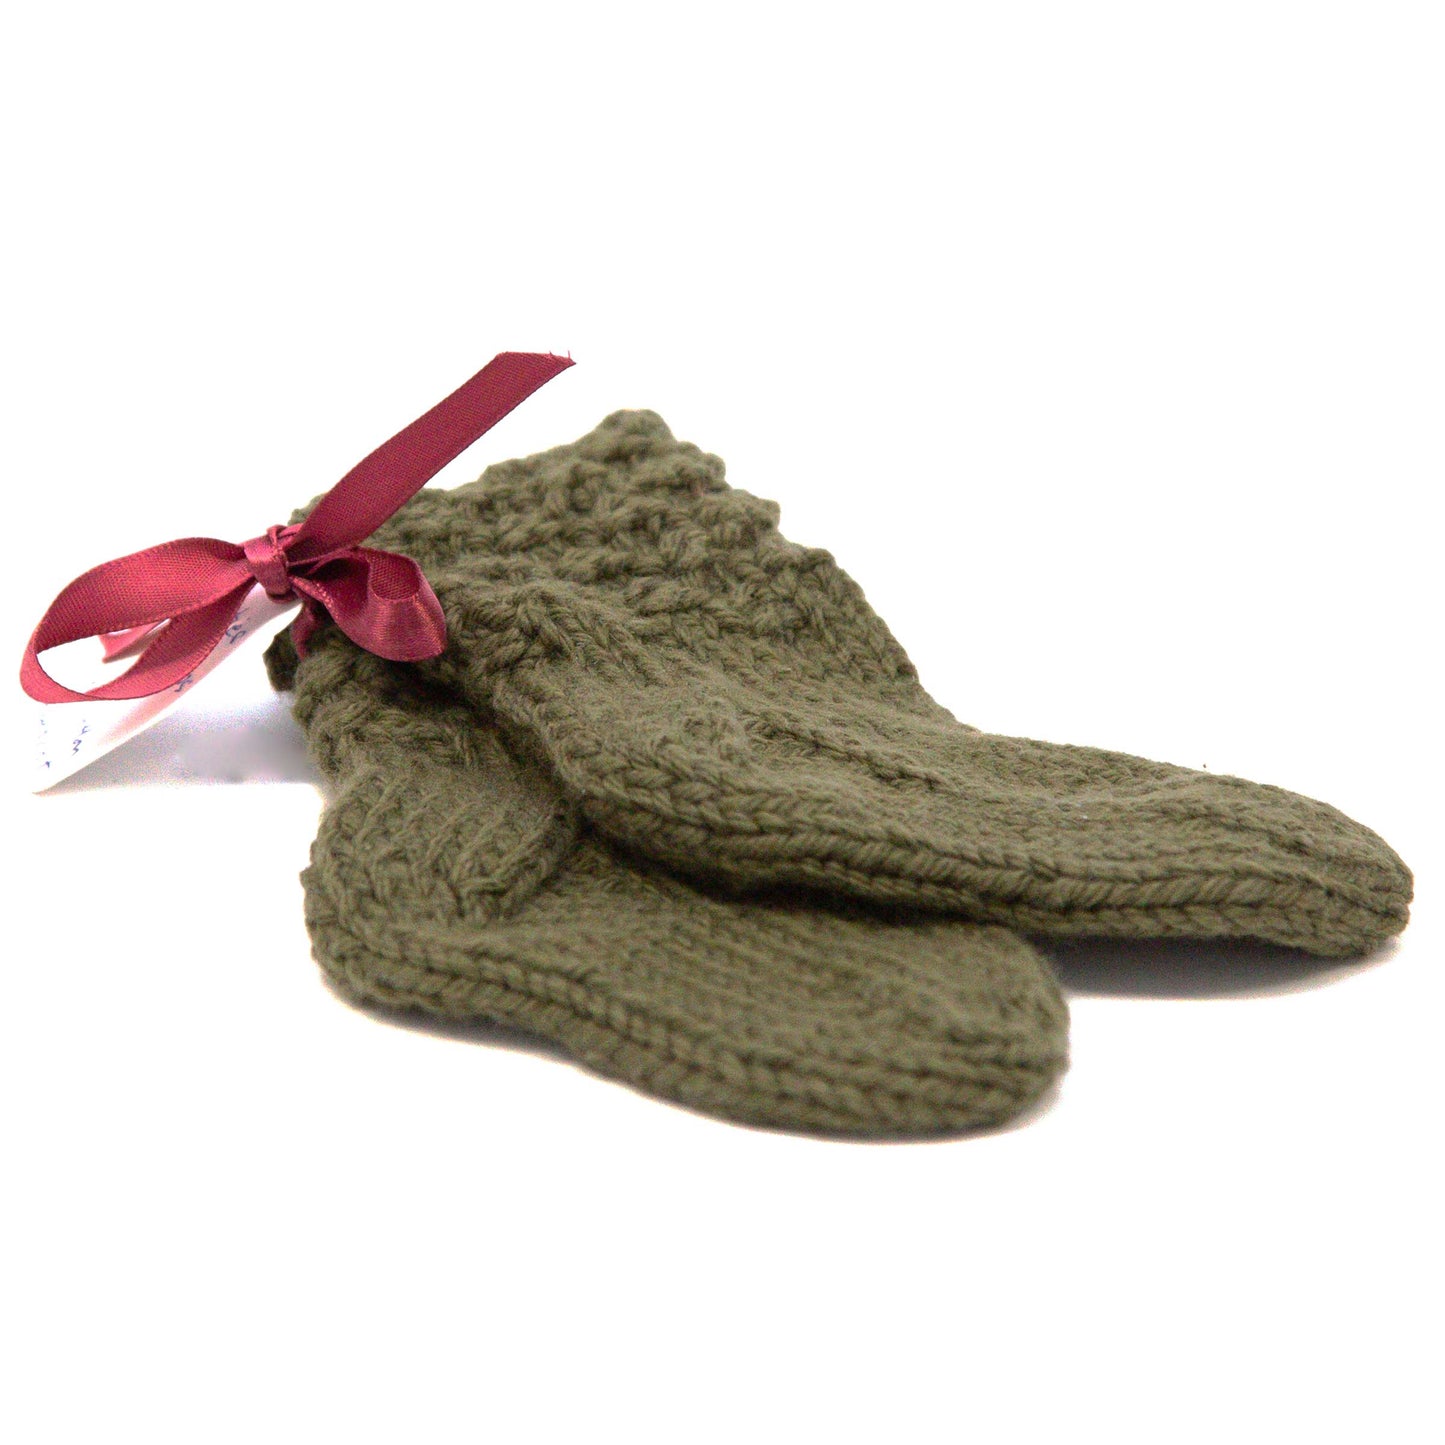 Baby Booties, 0-3 months, Hand Knit, Cotton, No Seam, Washable, Olive